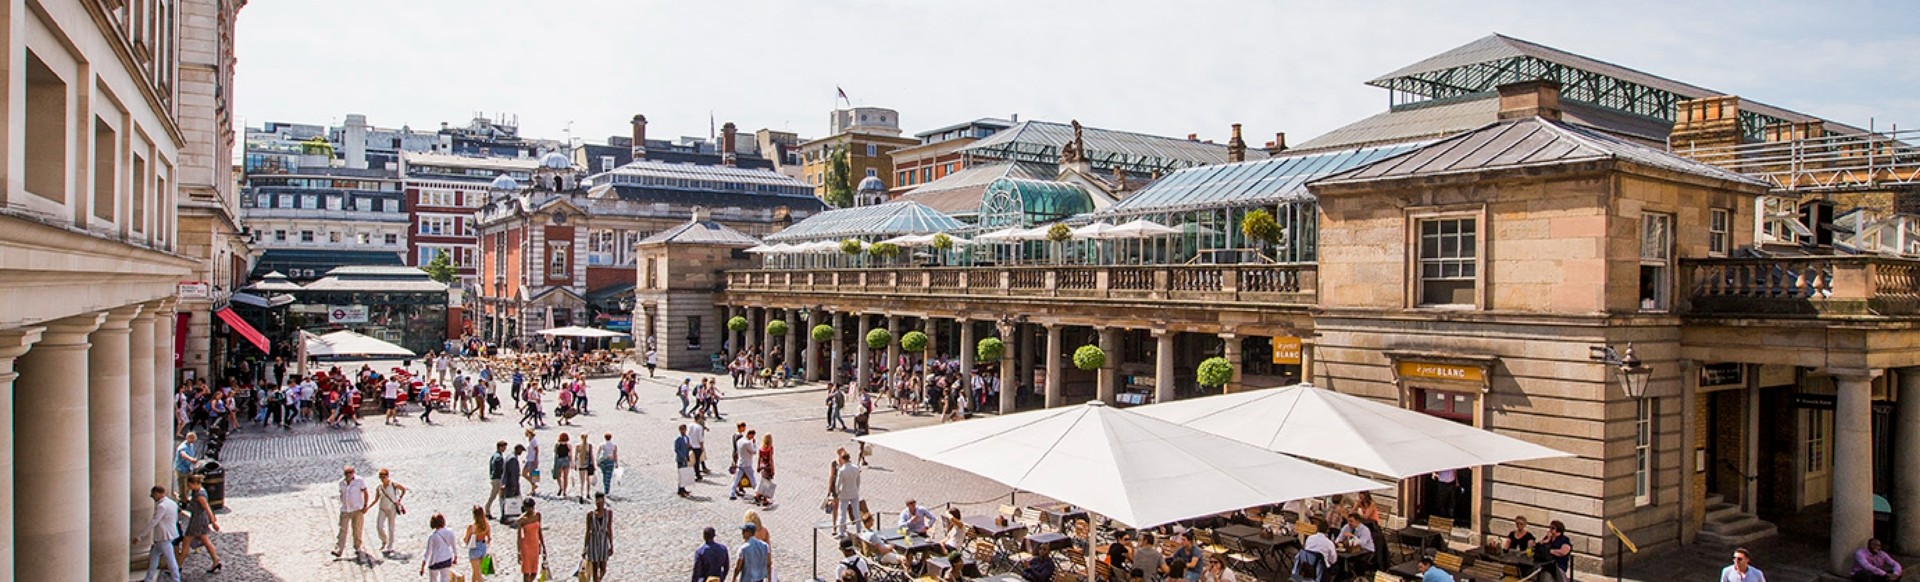 People walking in Covent Garden Piazza on a sunny day.